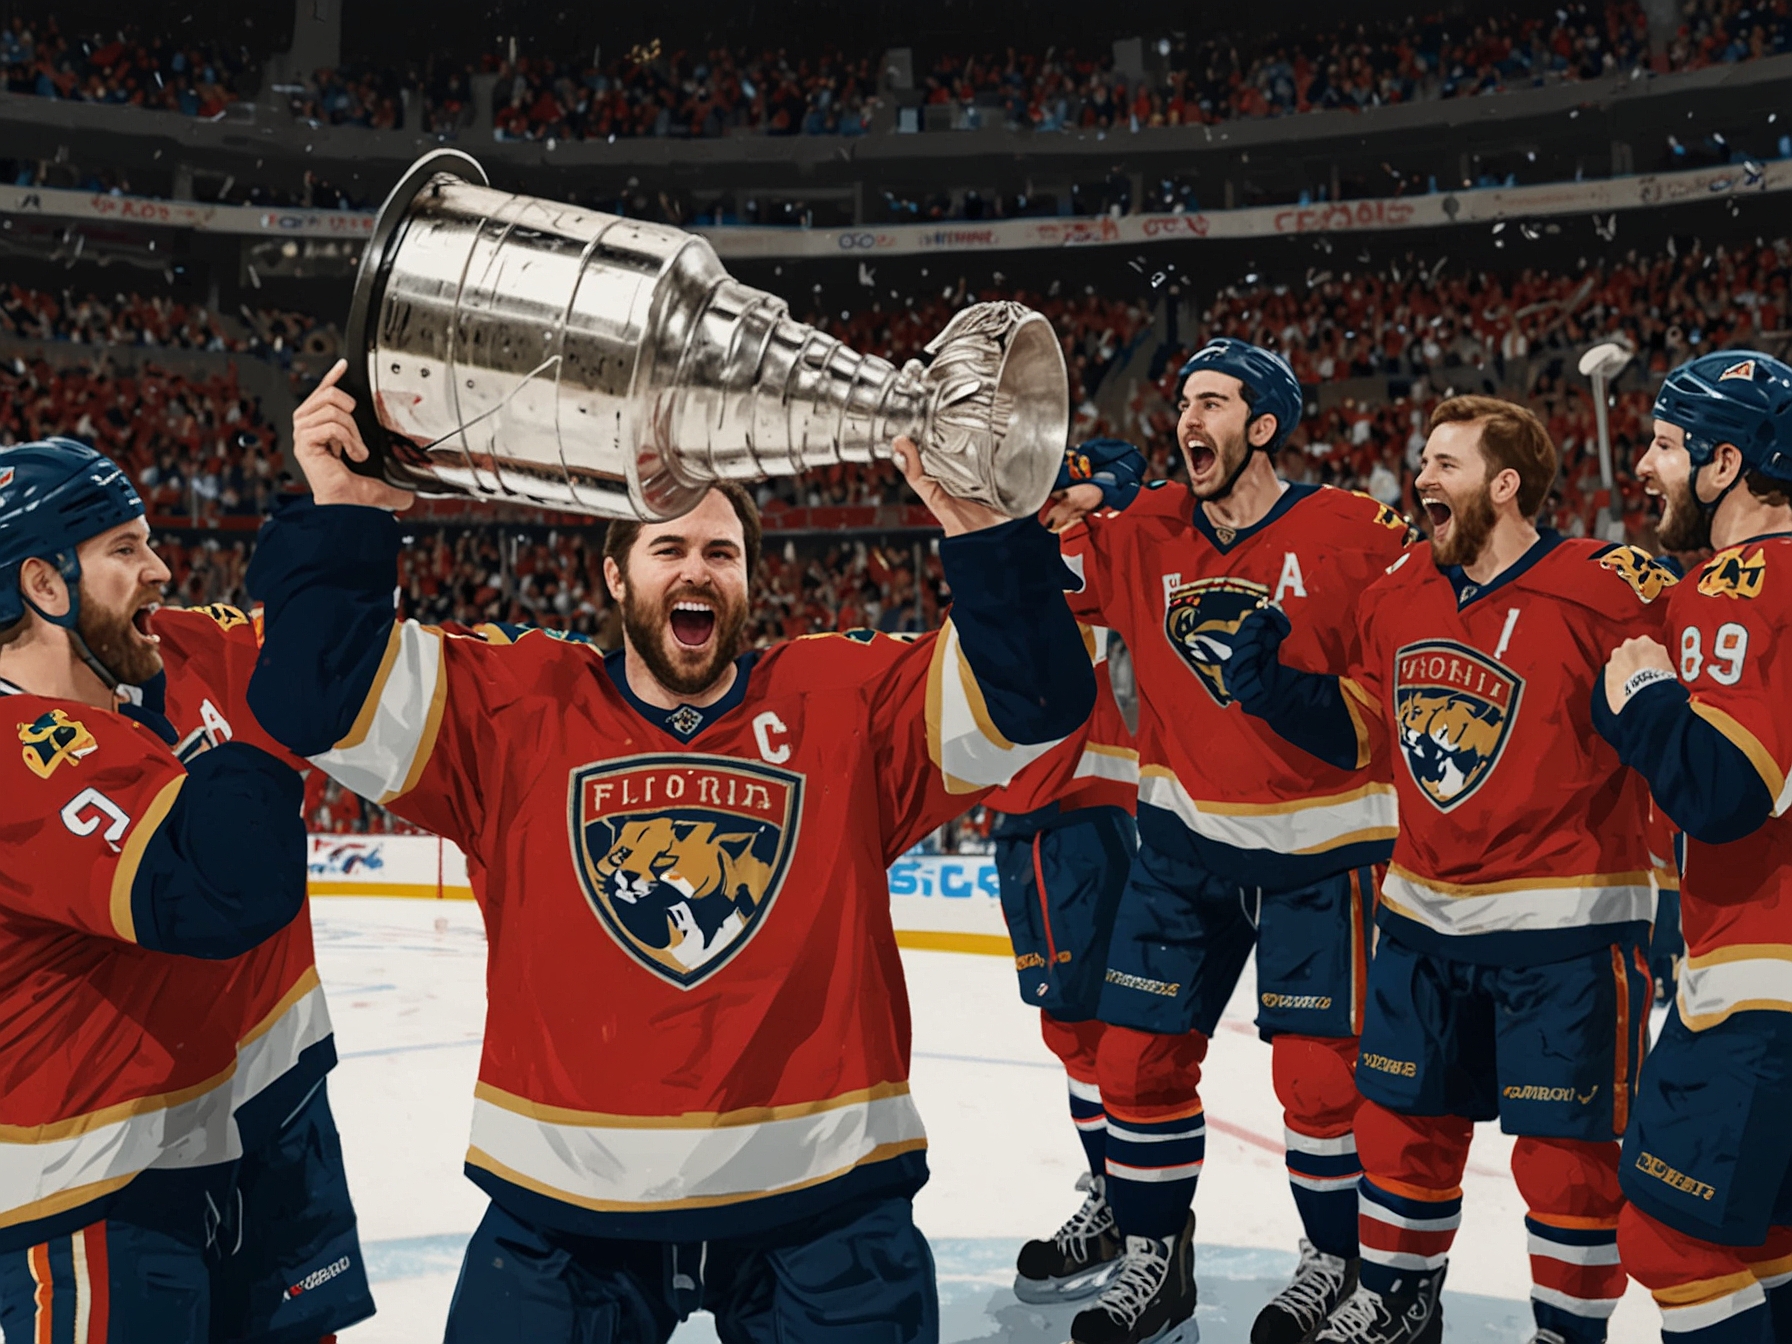 Celebratory scene as the Florida Panthers lift the Stanley Cup after their historic victory against the Edmonton Oilers in Game 7, capturing the joy and triumph of their first championship win since 1996.